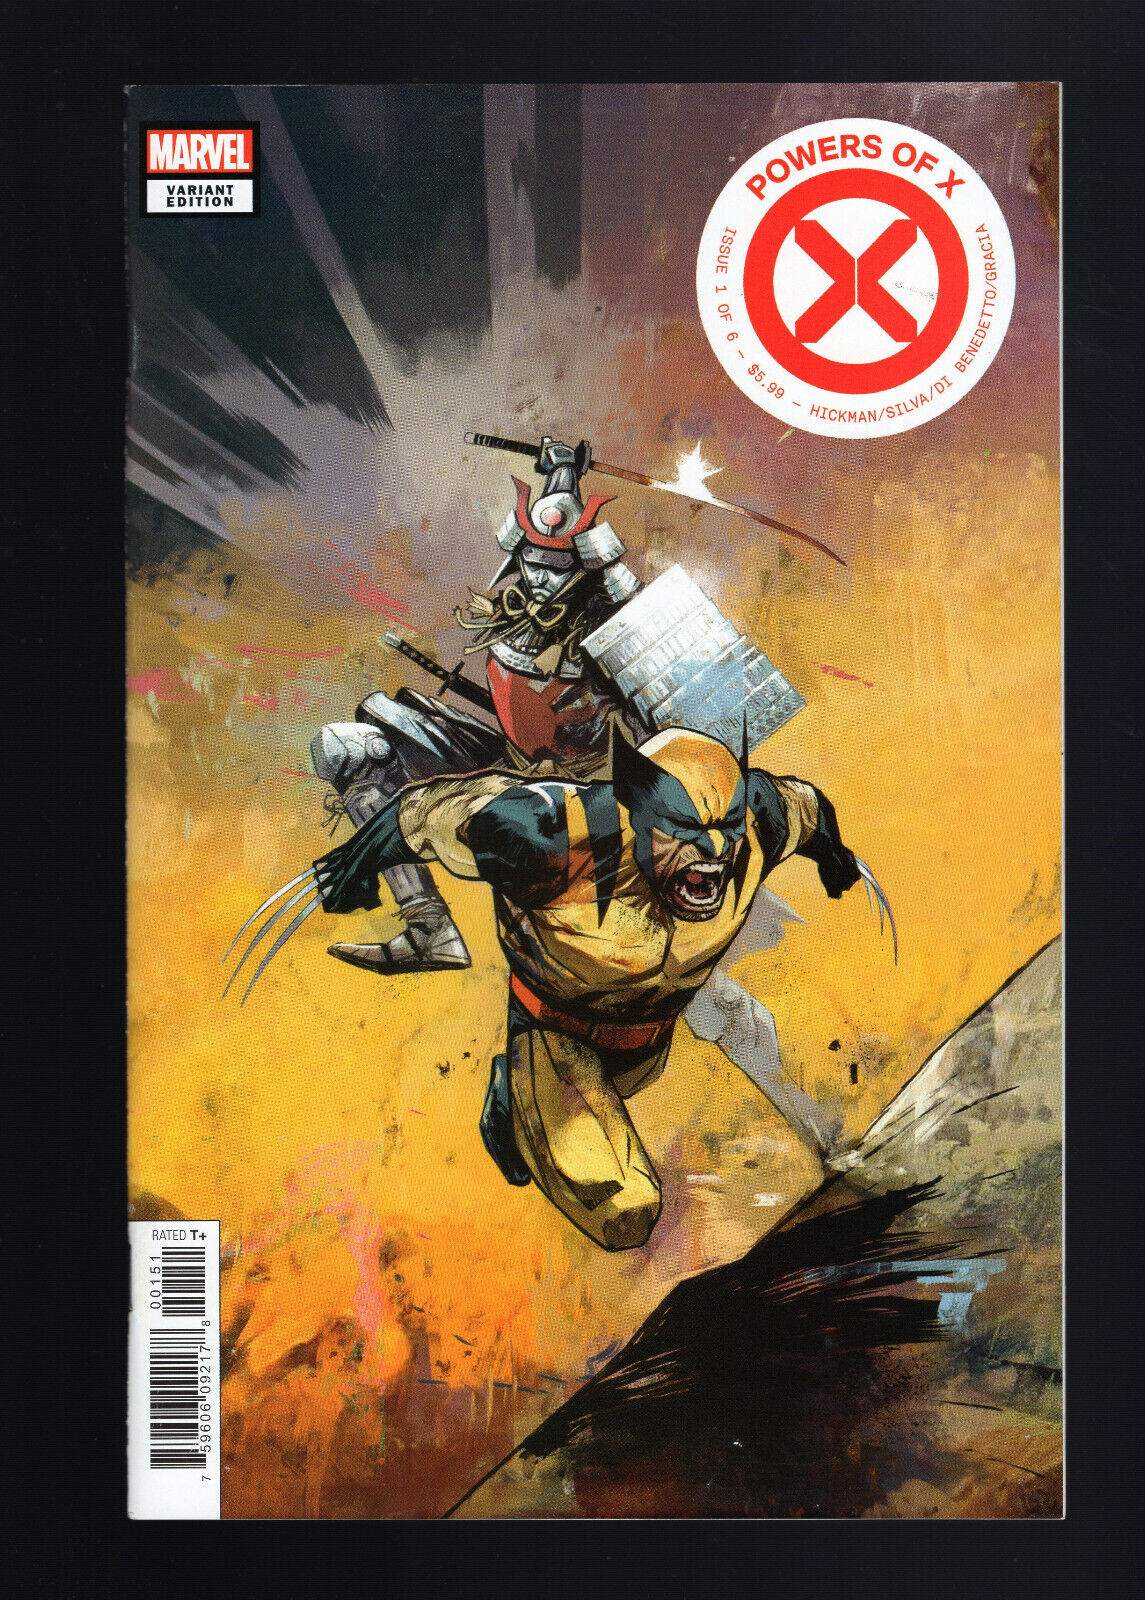 Powers of X #4 - Mike Huddleston 1:10 Incentive Variant Cover. (9.0/9.2) 2019